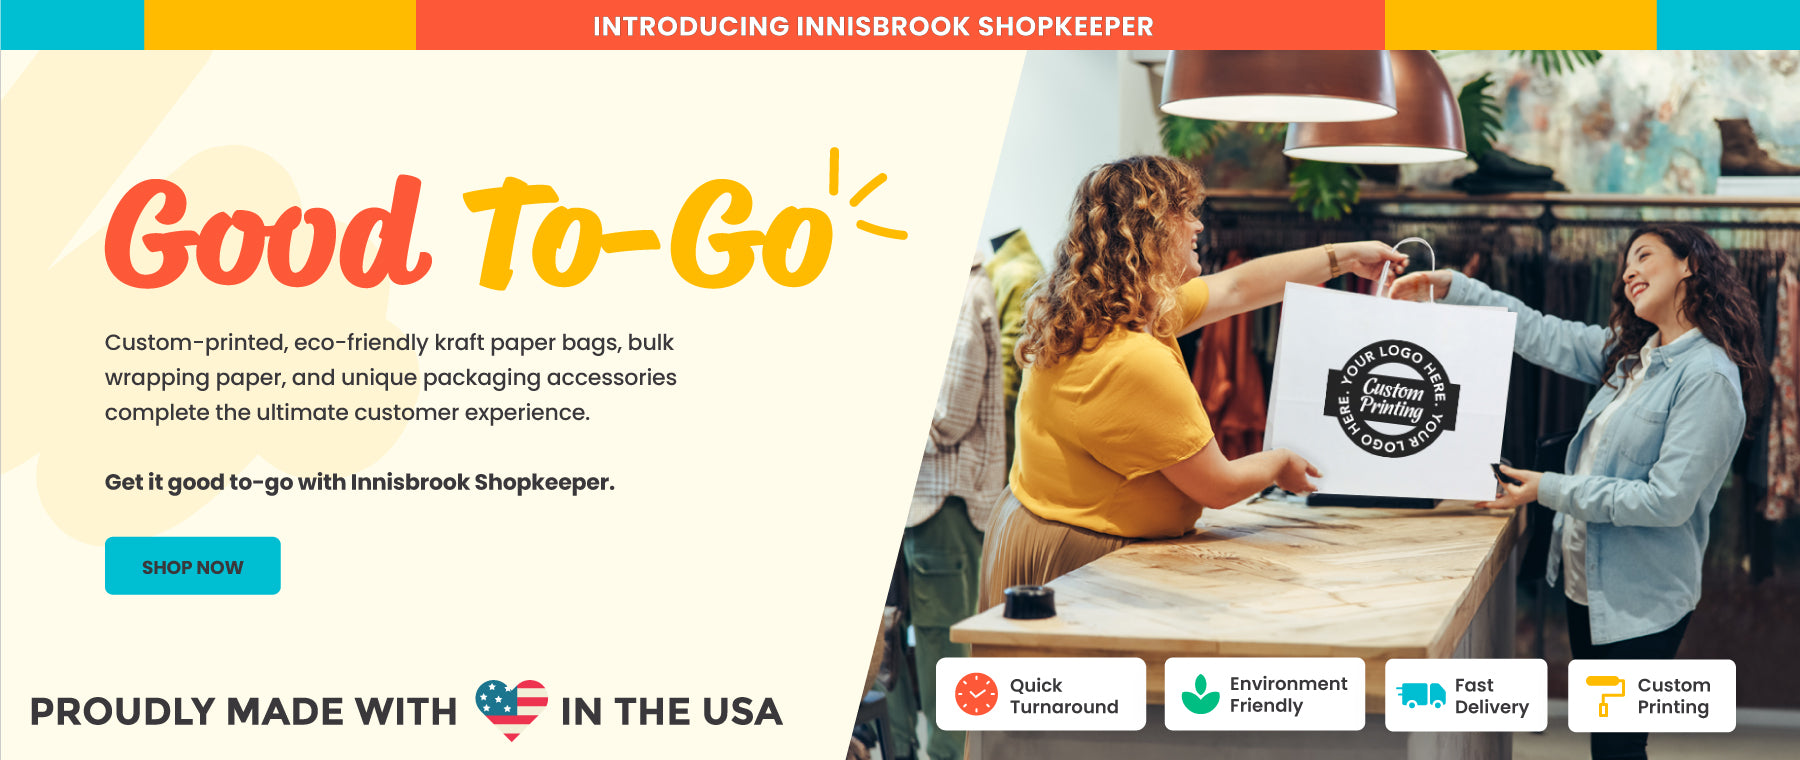 Innisbrook Shopkeeper offers custom-printed and eco-friendly bags with fast delivery and quick turnaround for the ultimate customer experience.